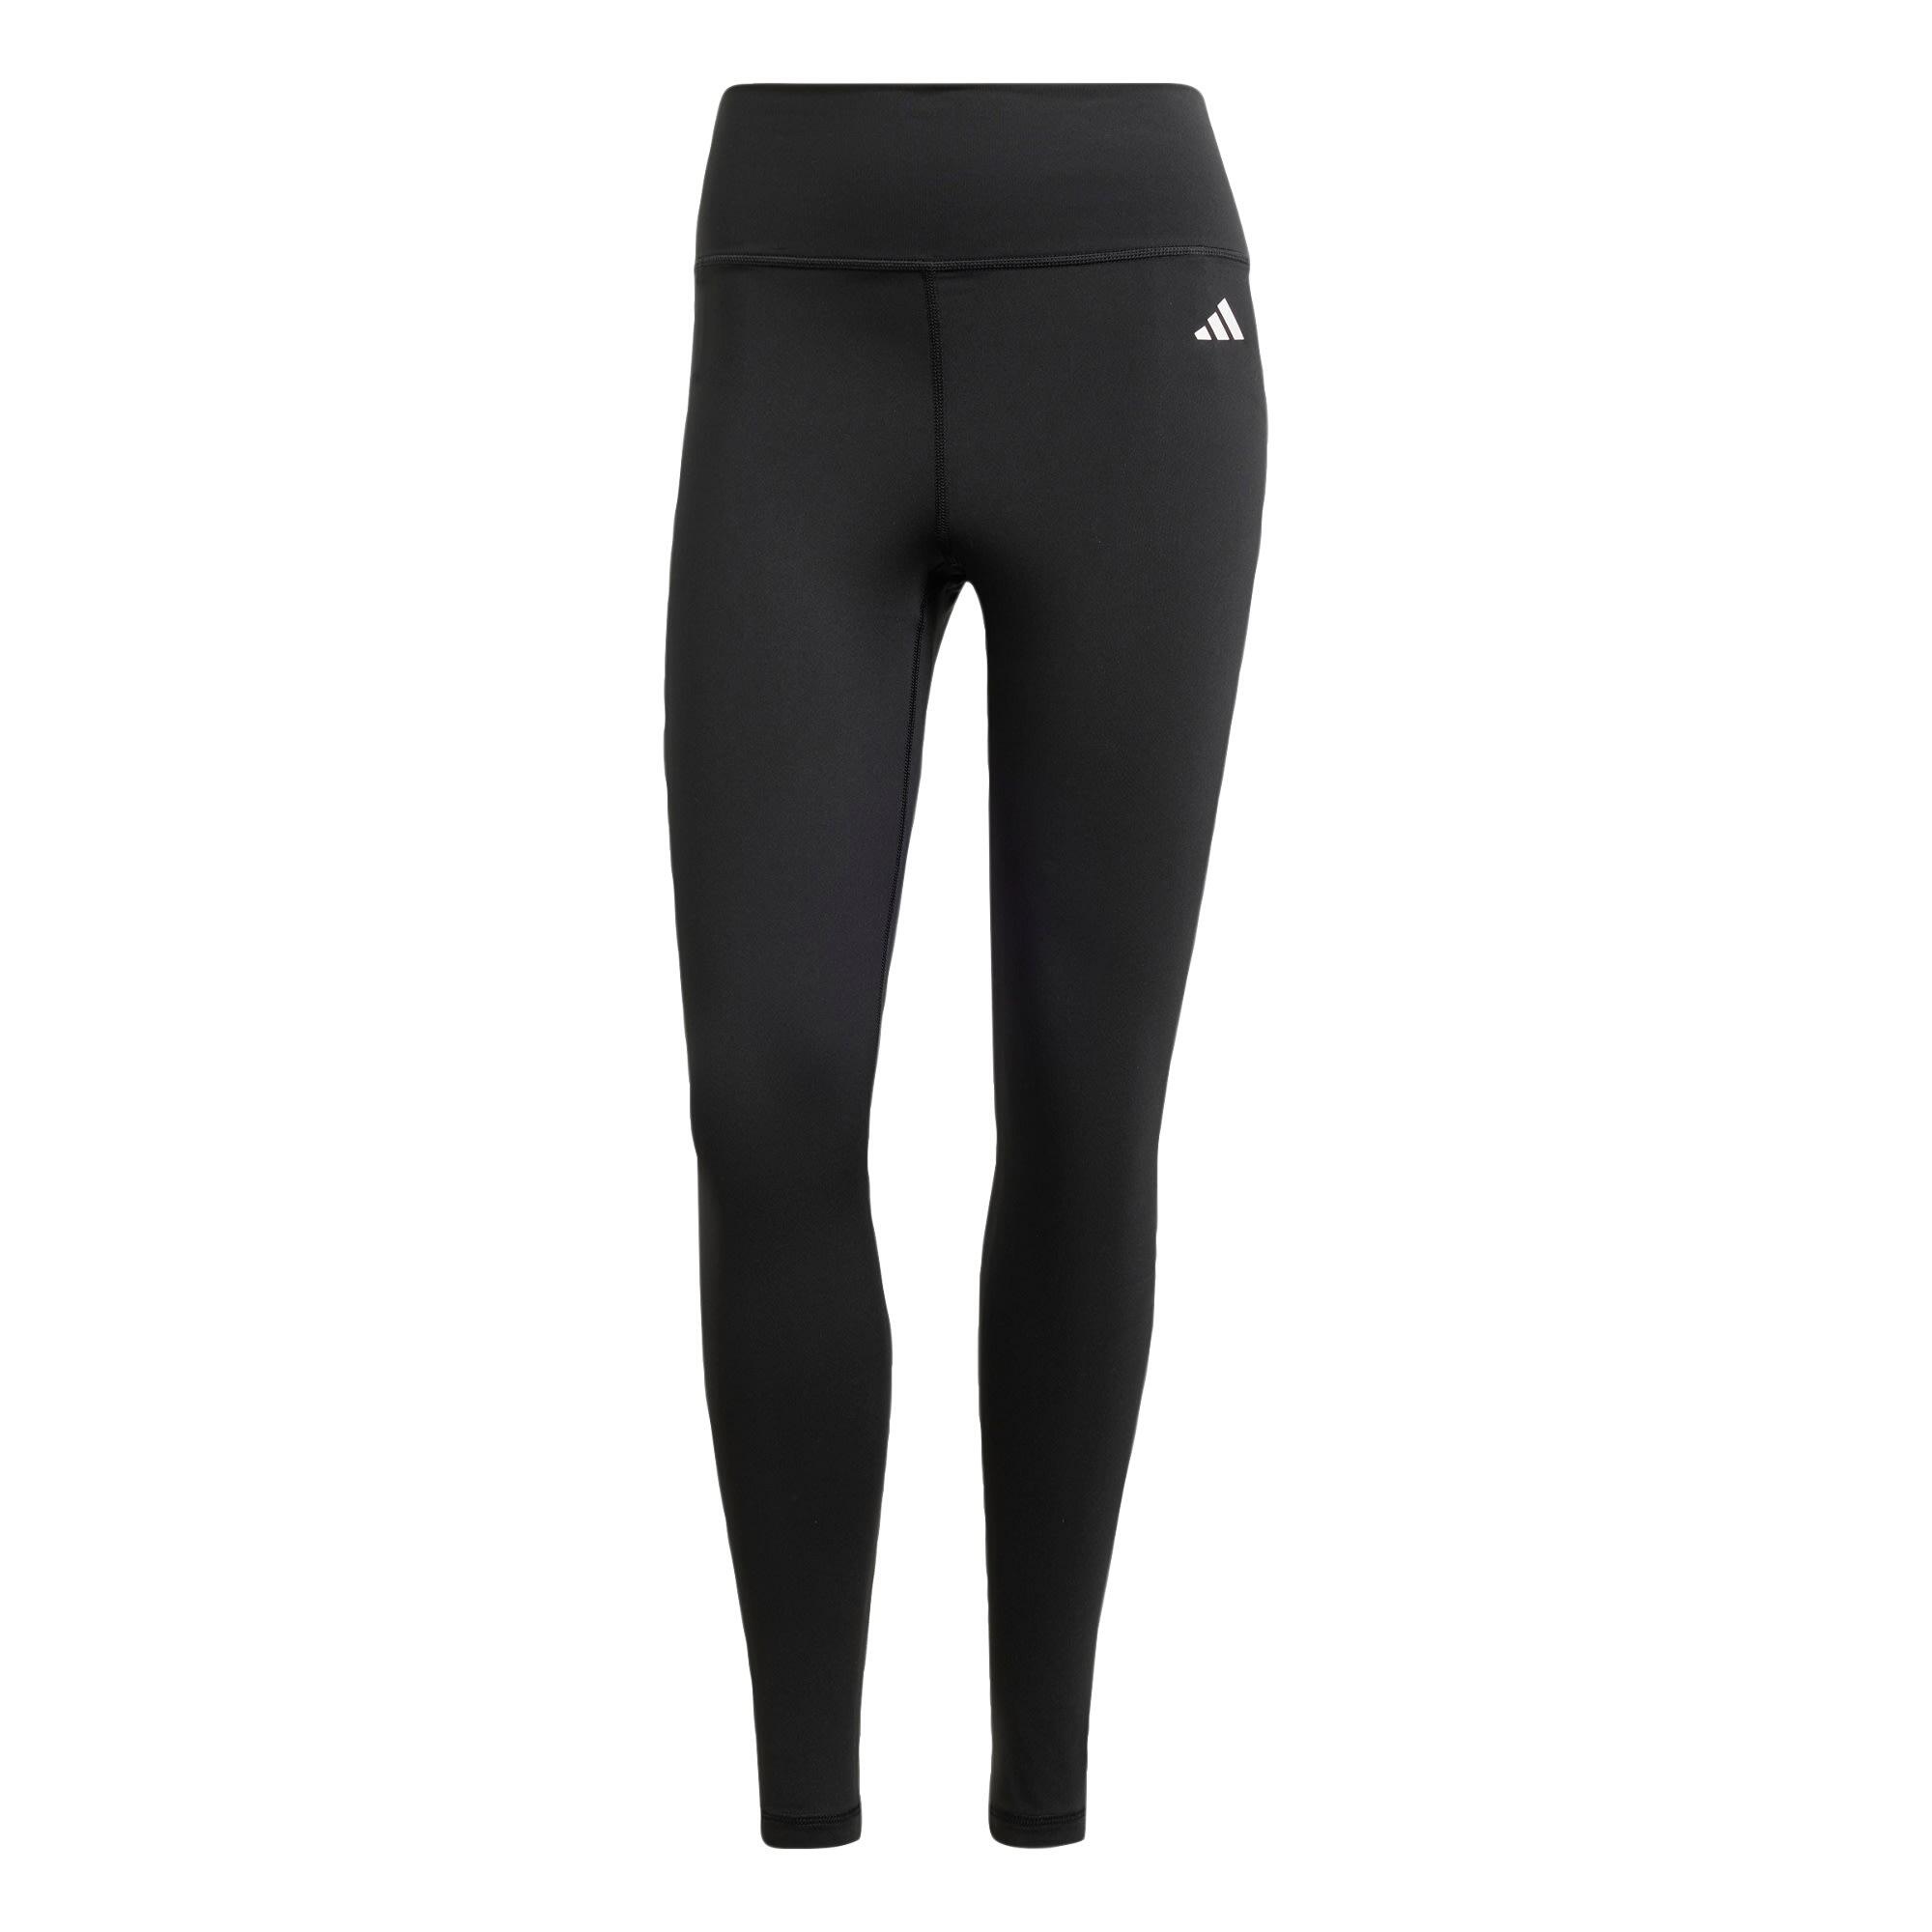 Extra Strong Compression Stirrup Leggings with Tummy Control Short